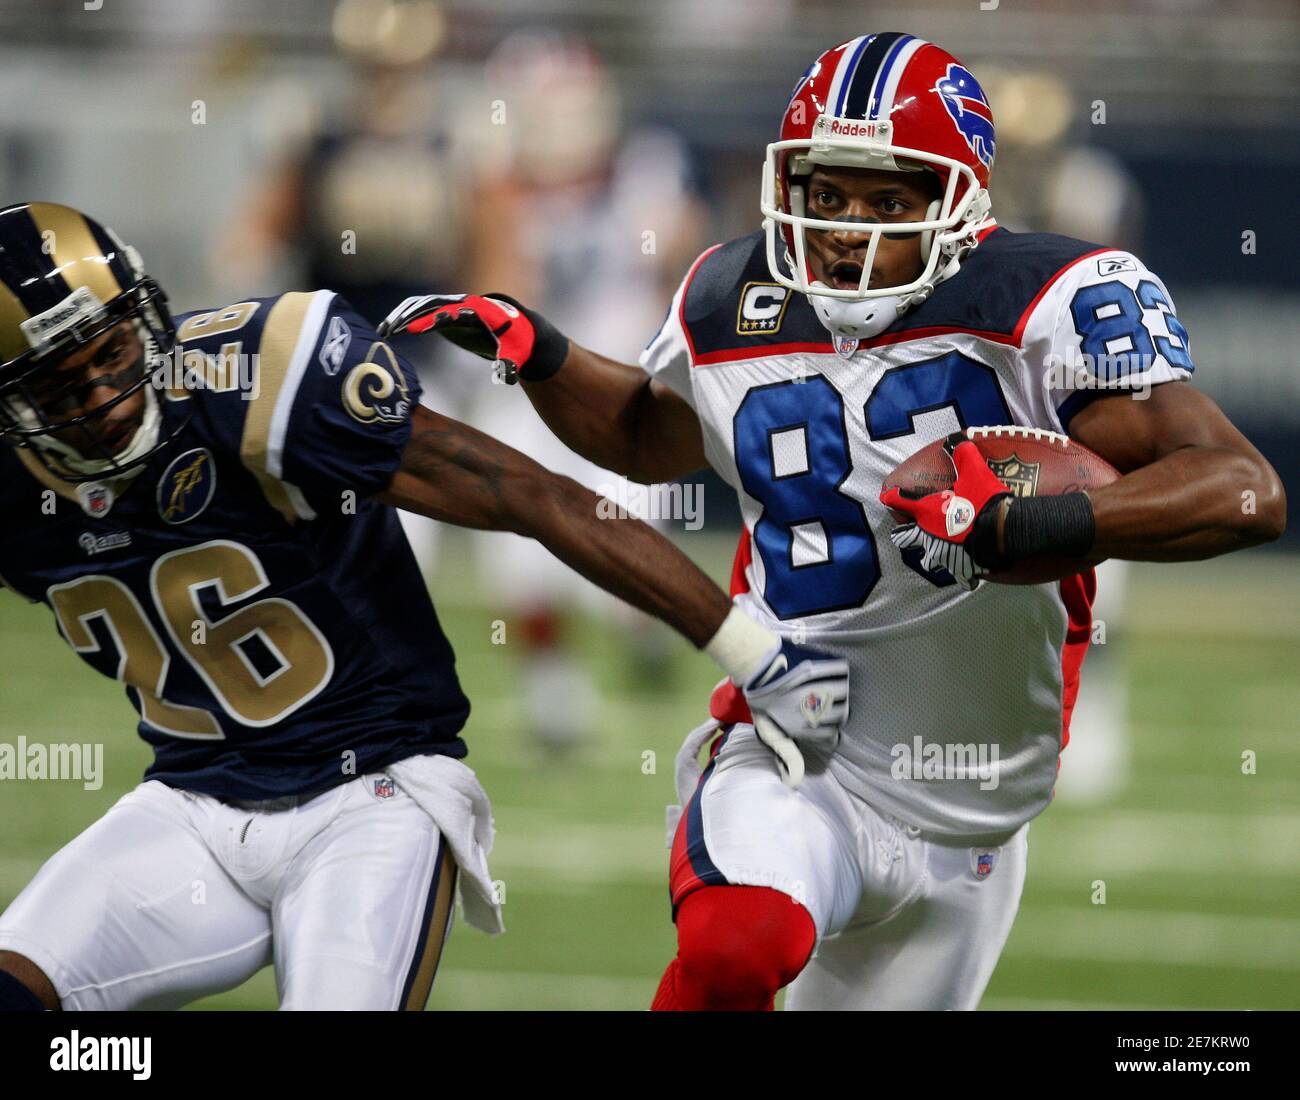 Buffalo Bills wide receiver Lee Evans (83) catches a 49-yard pass against  St. Louis Rams Tye Hill (26) during the first quarter of the their NFL  football game in St. Louis, Missouri